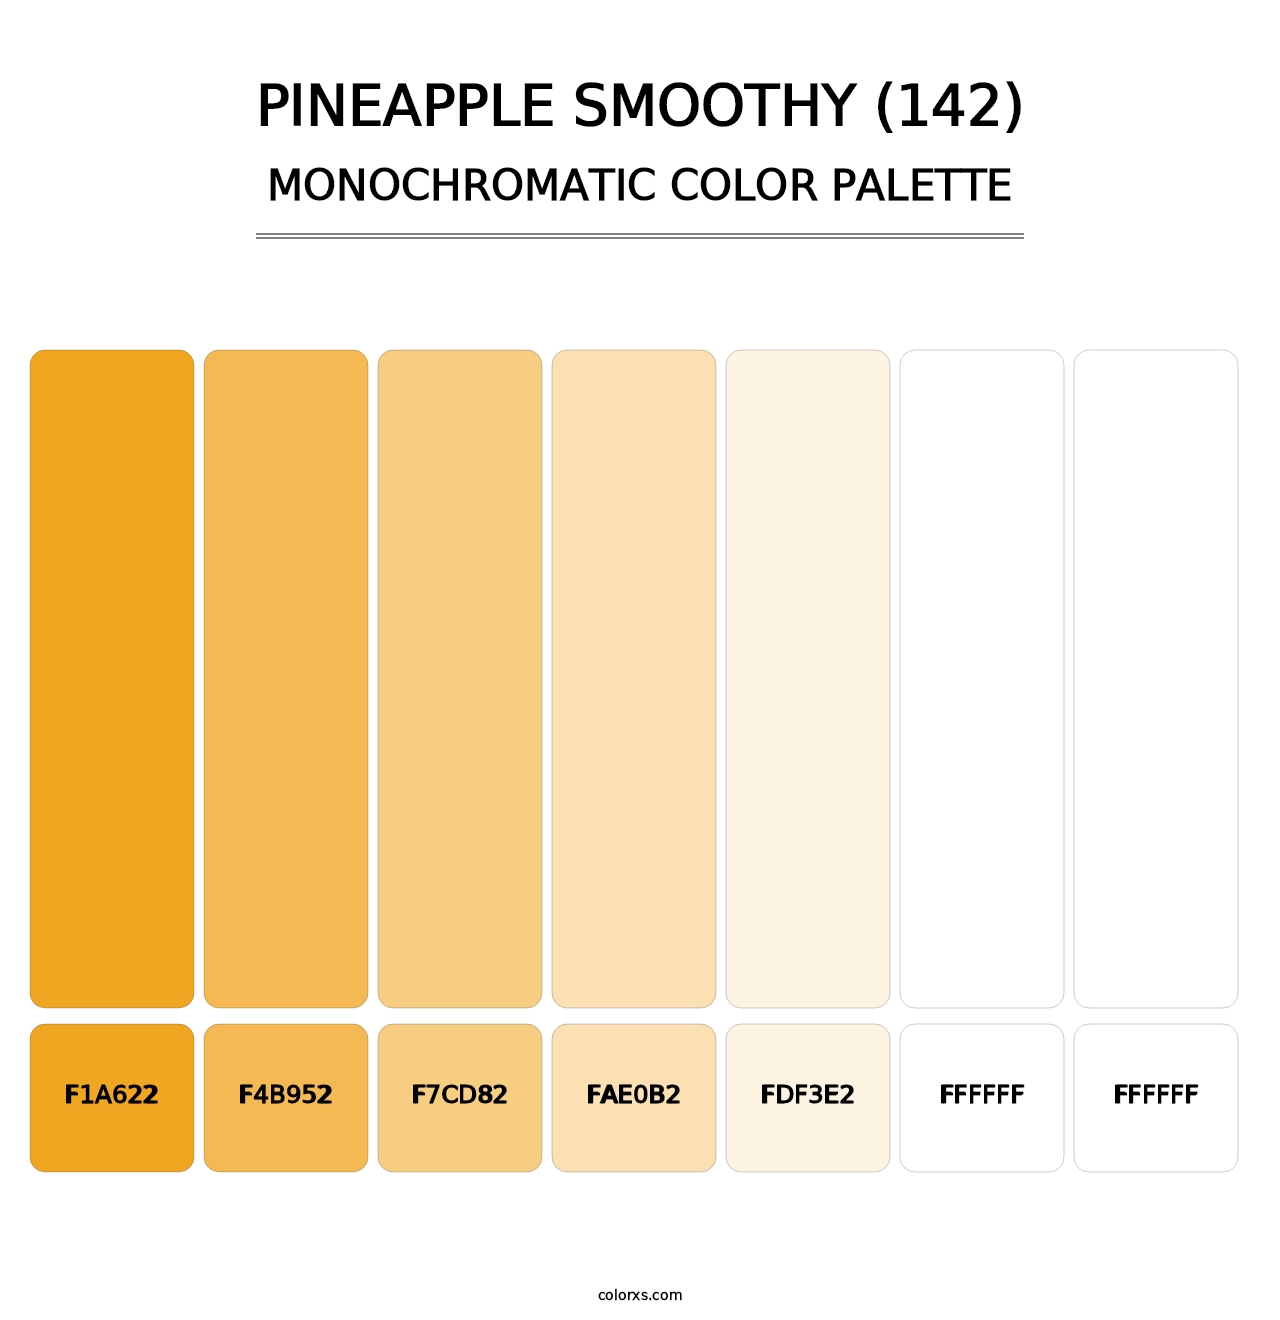 Pineapple Smoothy (142) - Monochromatic Color Palette